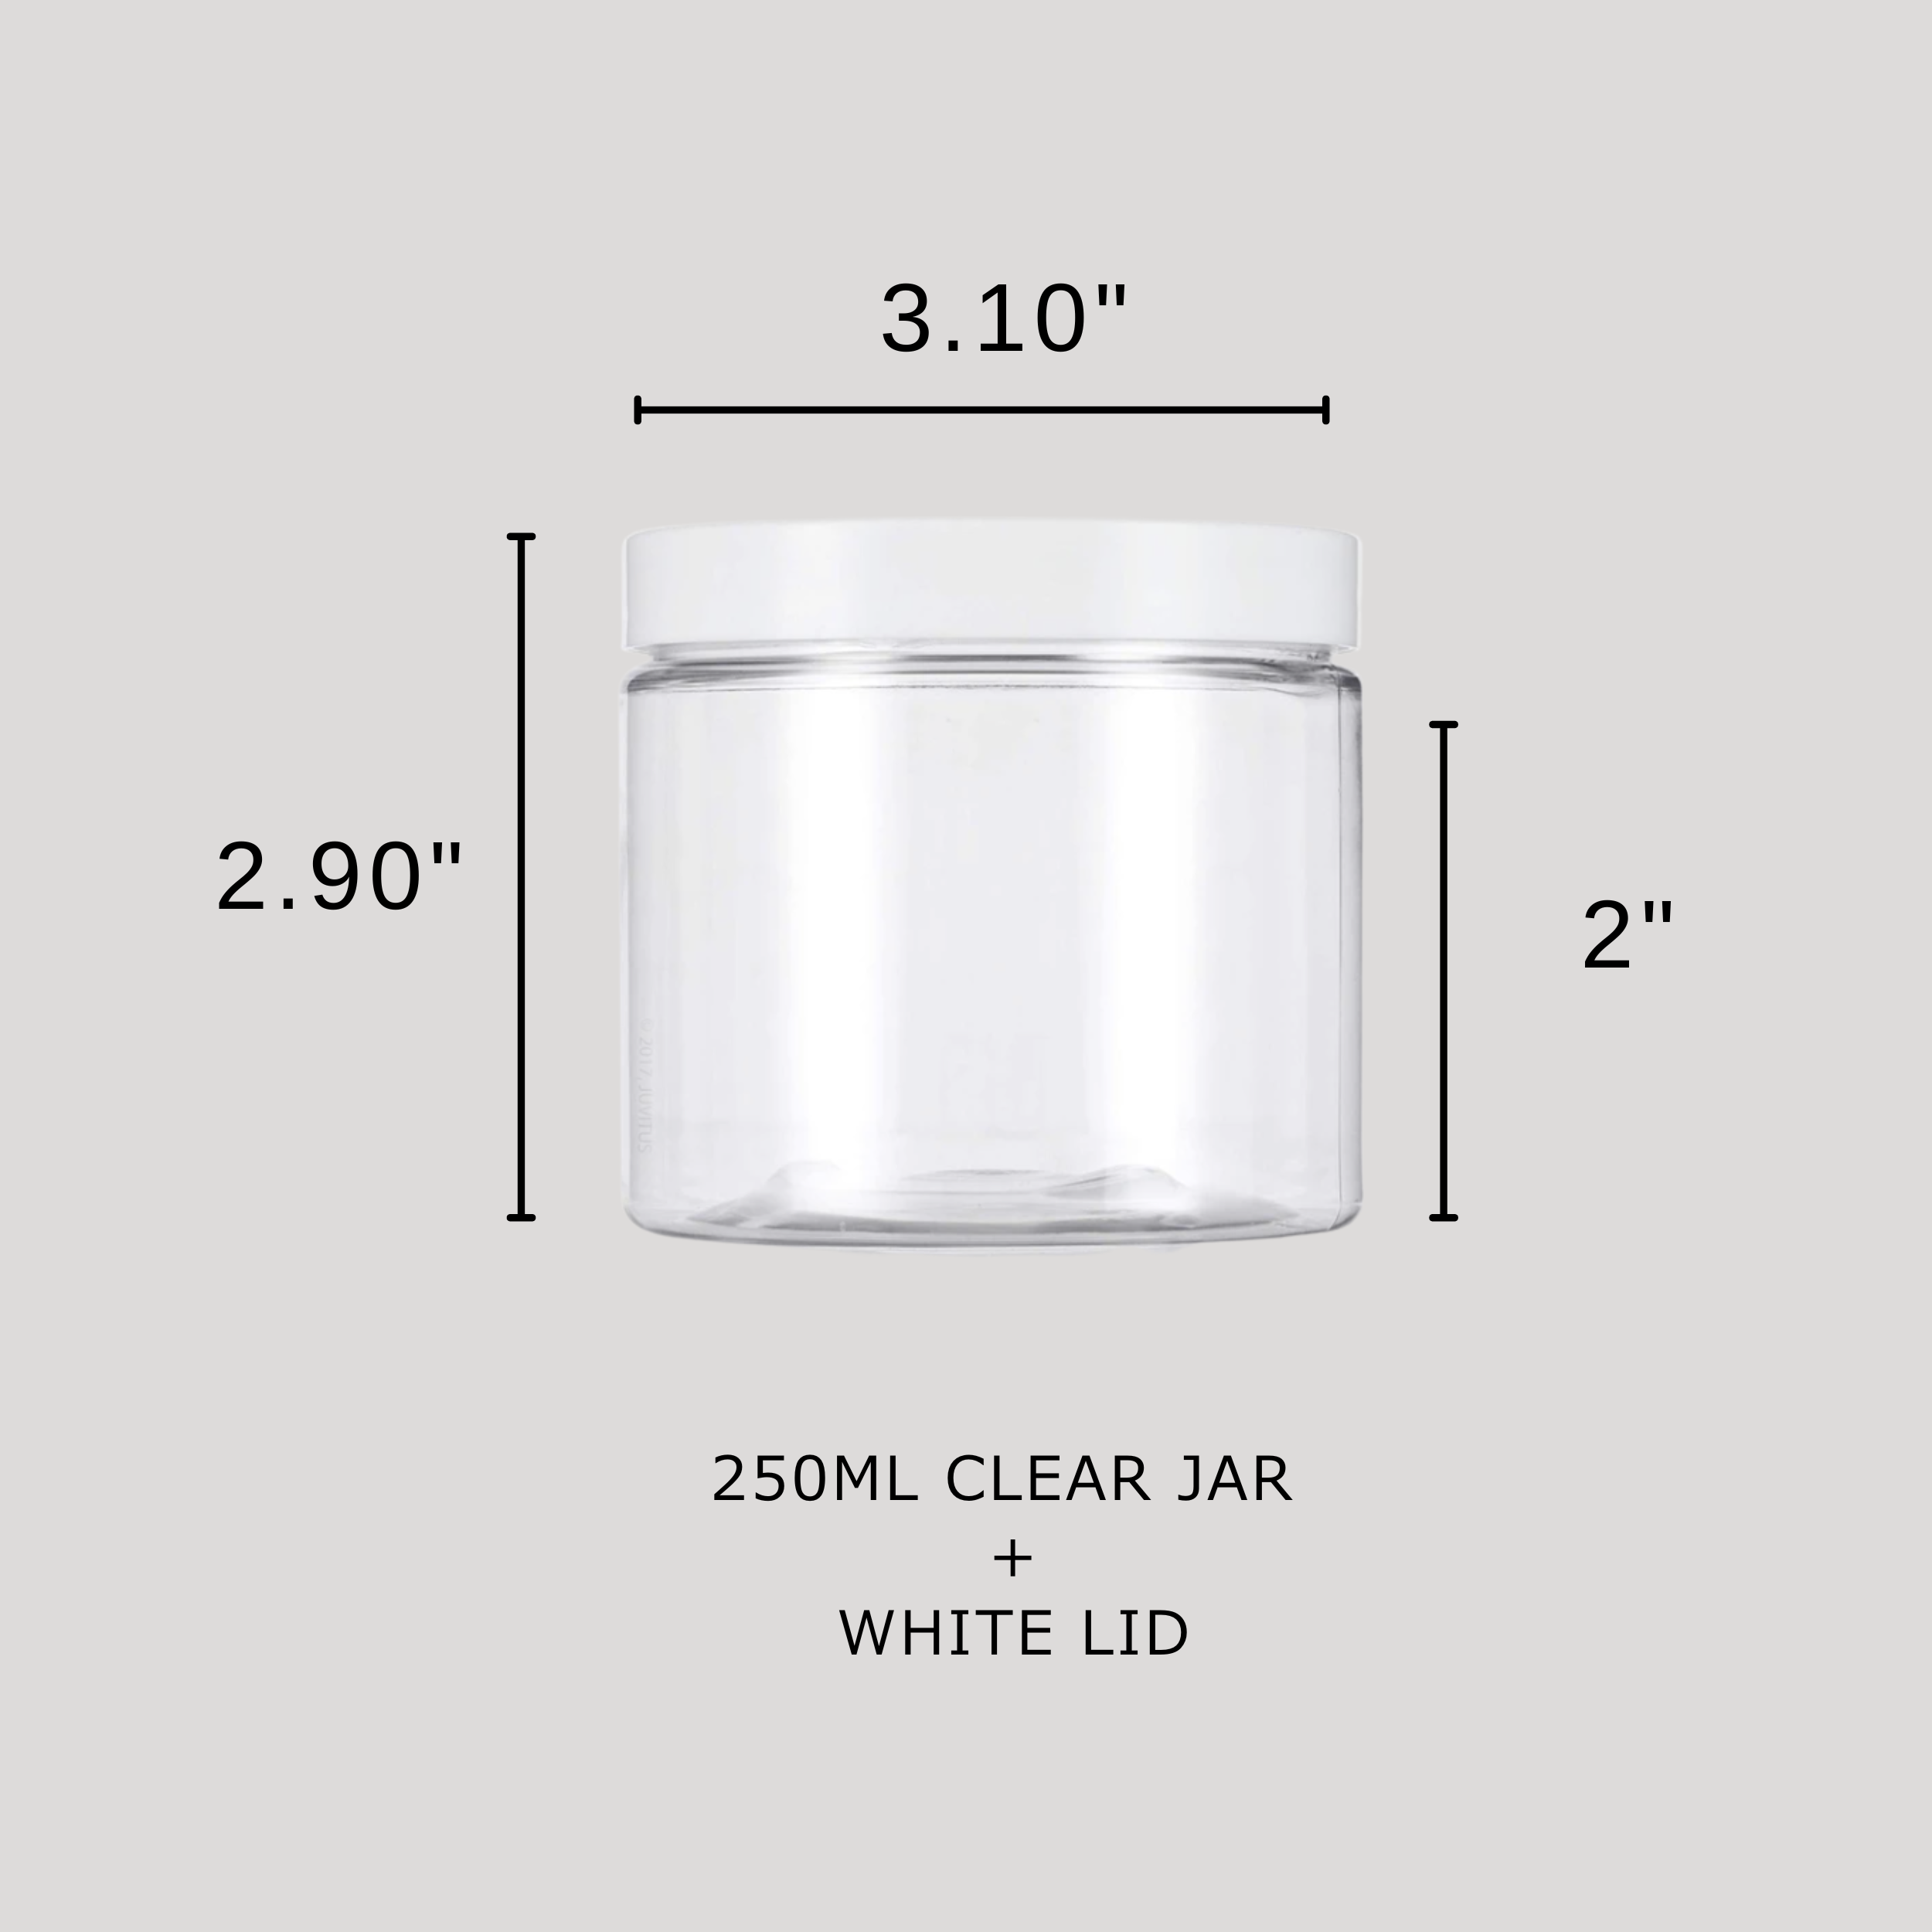 PACKAGE- 240g 240ml 8oz Clear Plastic Jar + White Smooth Cap